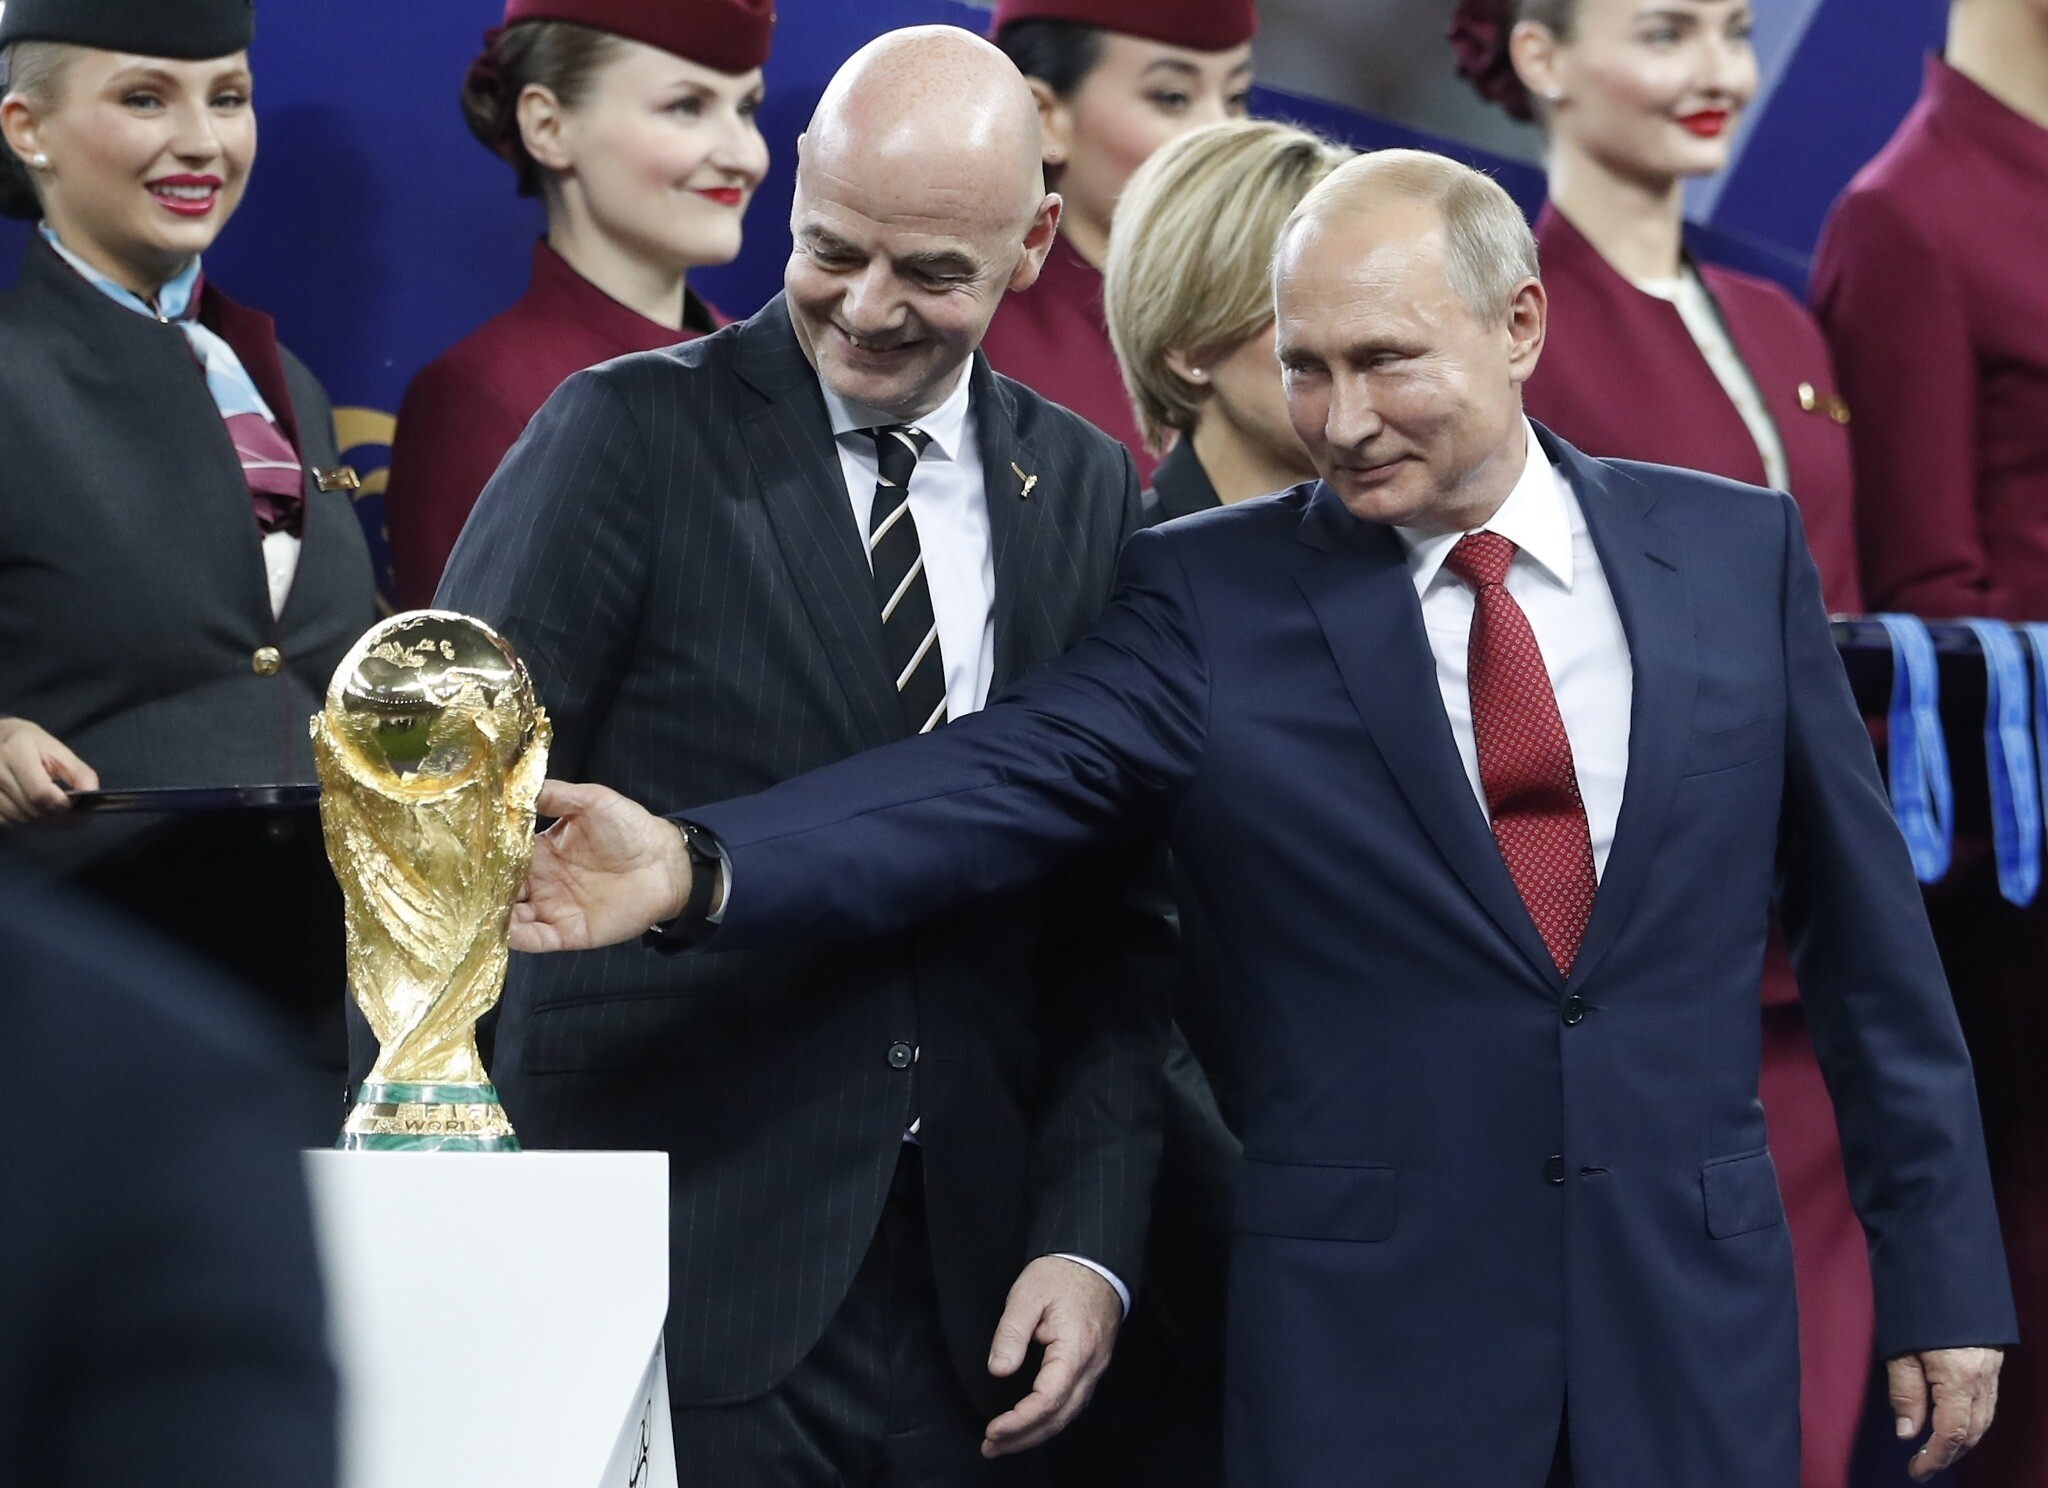 Russia Suspended From International Soccer Four Years After Hosting World Cup The Times Of Israel